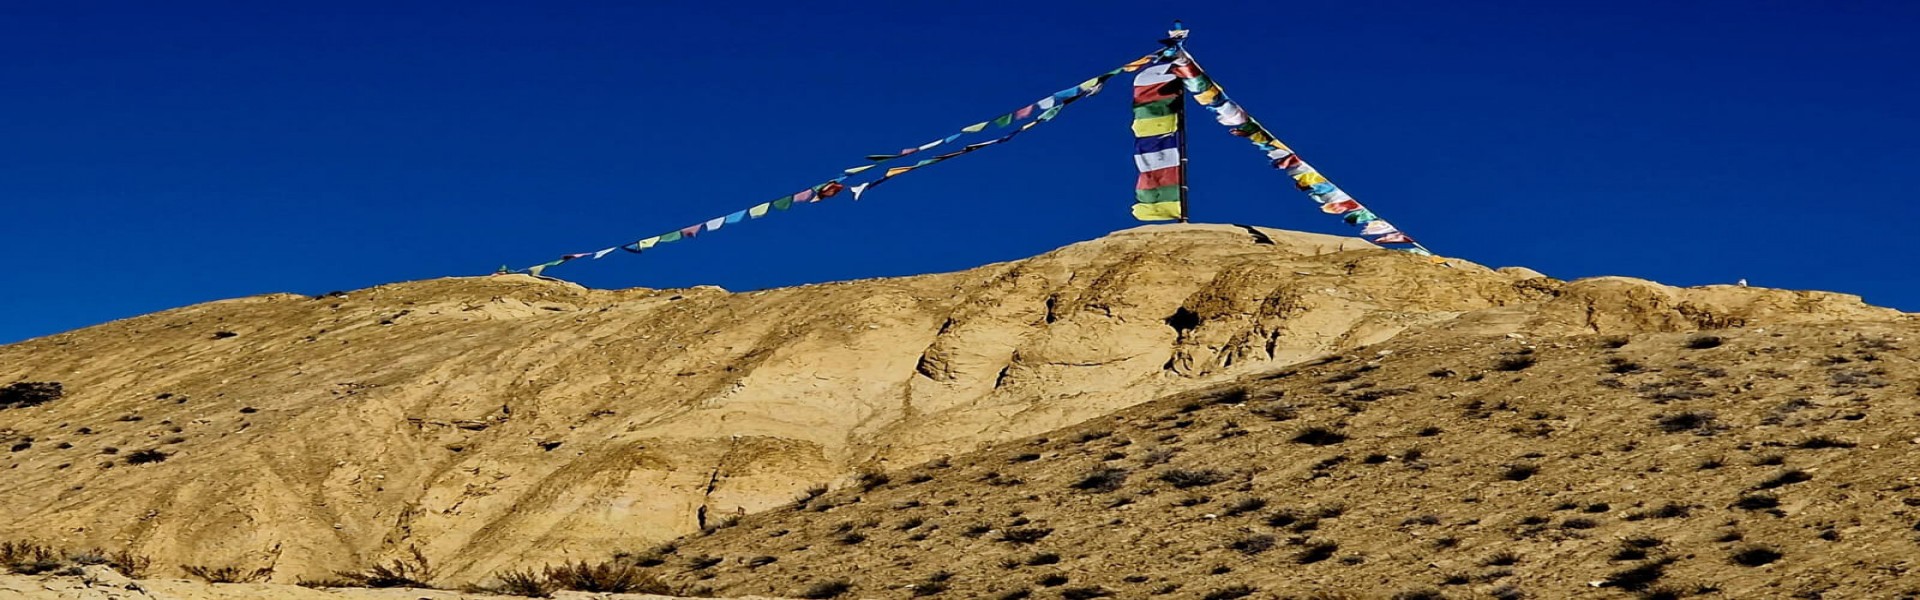 Upper Mustang view from Konchok ling